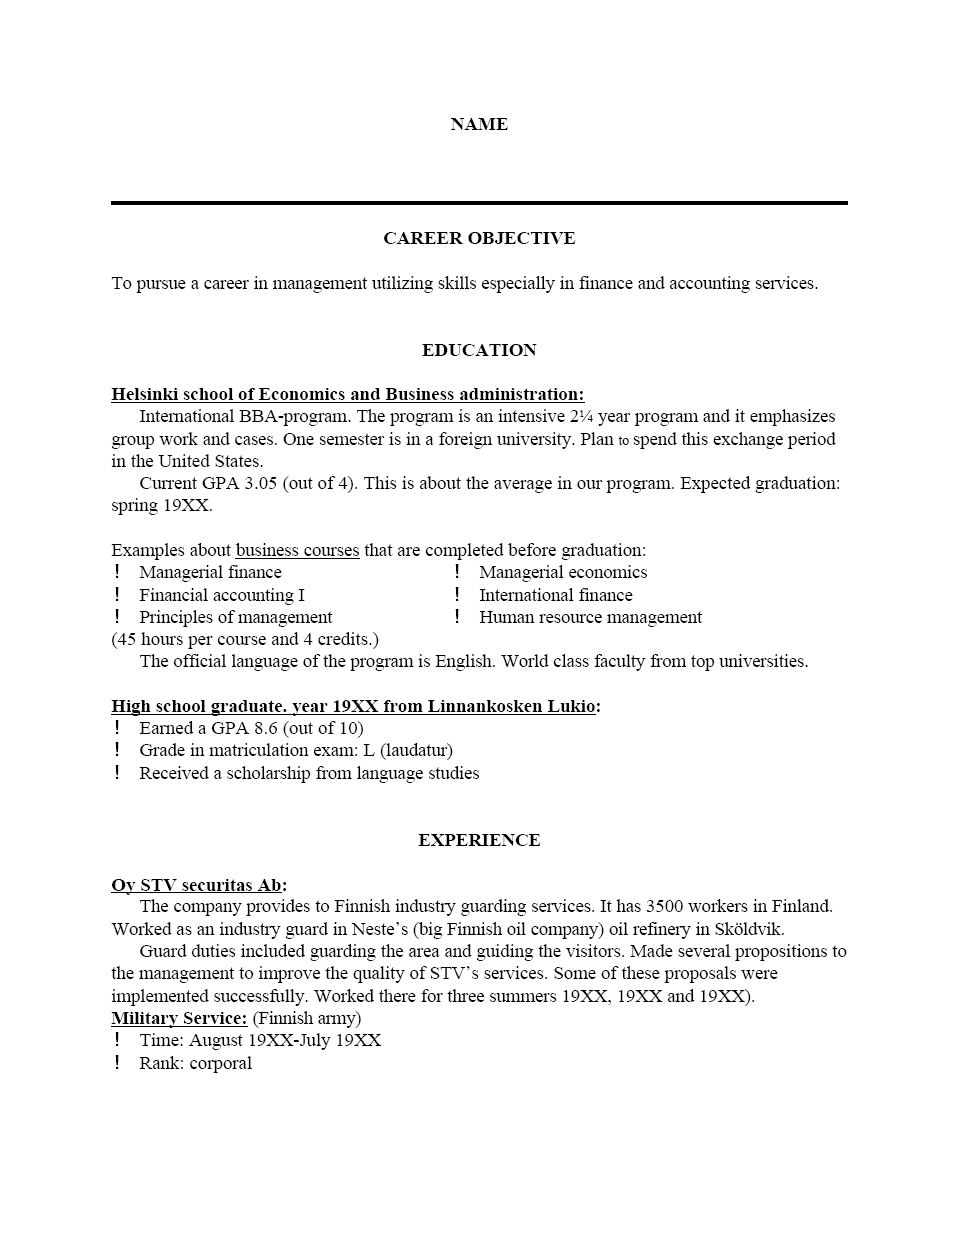 resume format resume format about